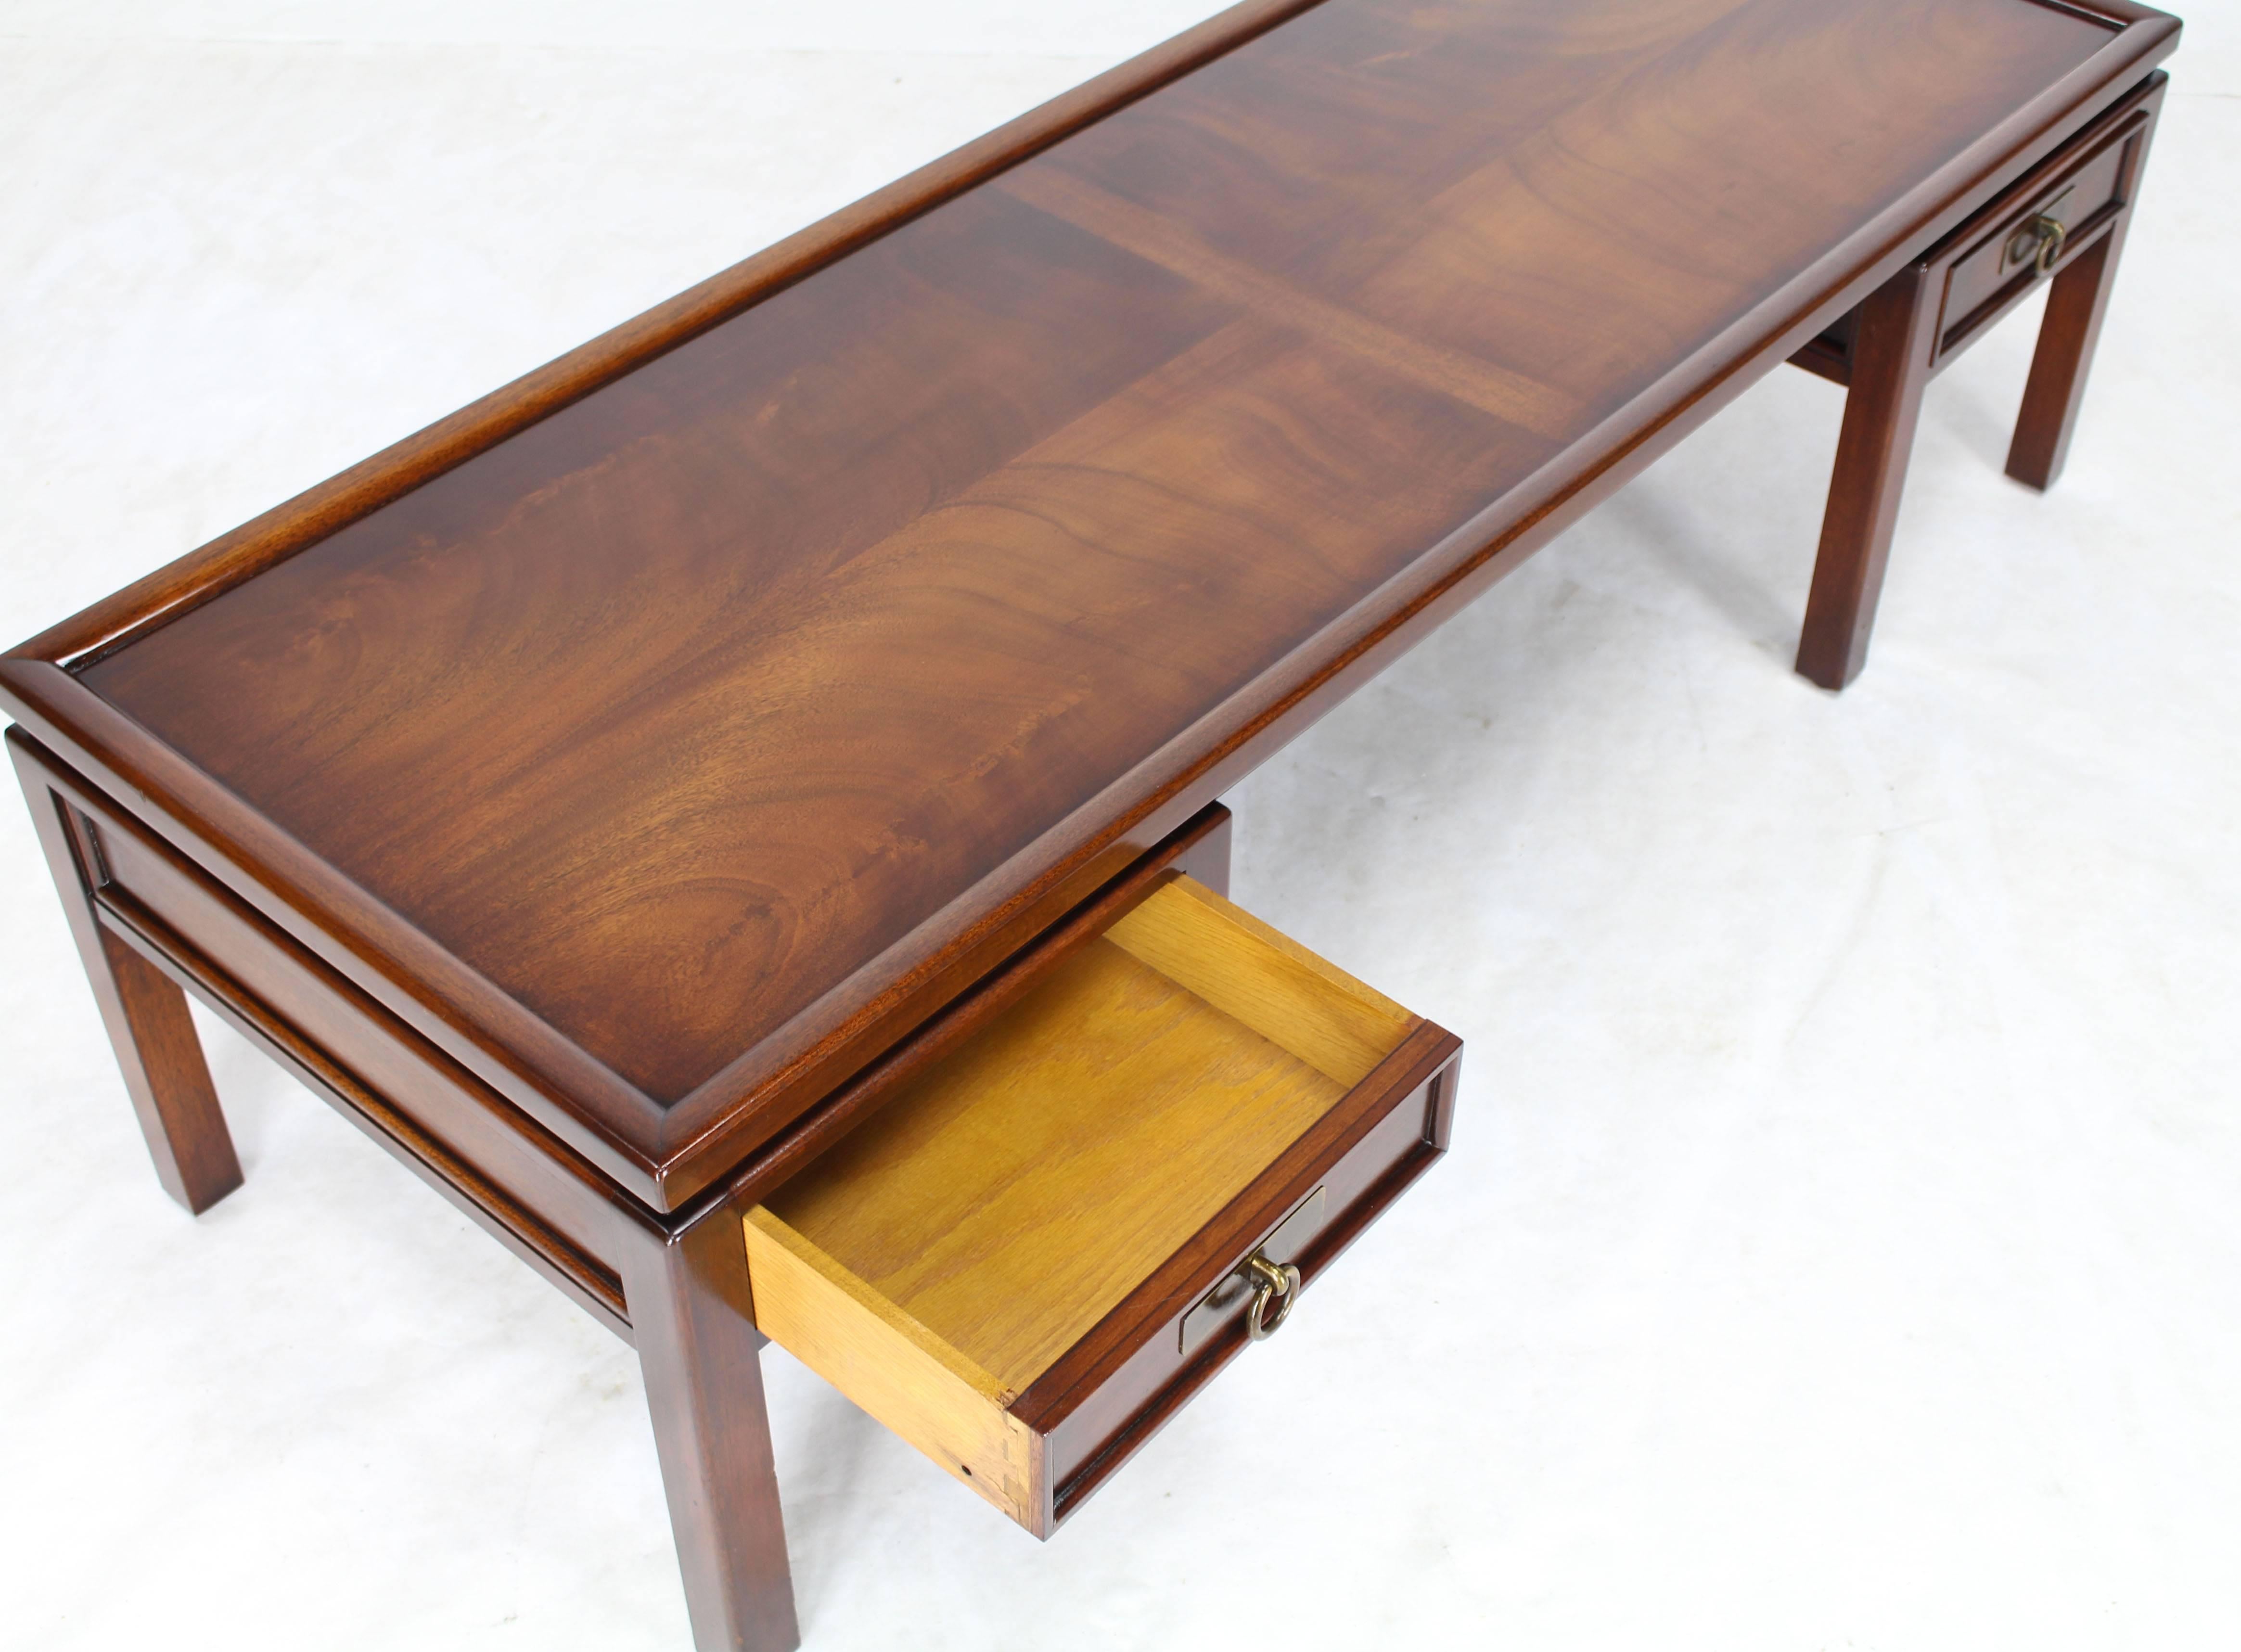 Mahogany Double Pedestal Two Drawers Rectangular Coffee Table In Excellent Condition For Sale In Rockaway, NJ